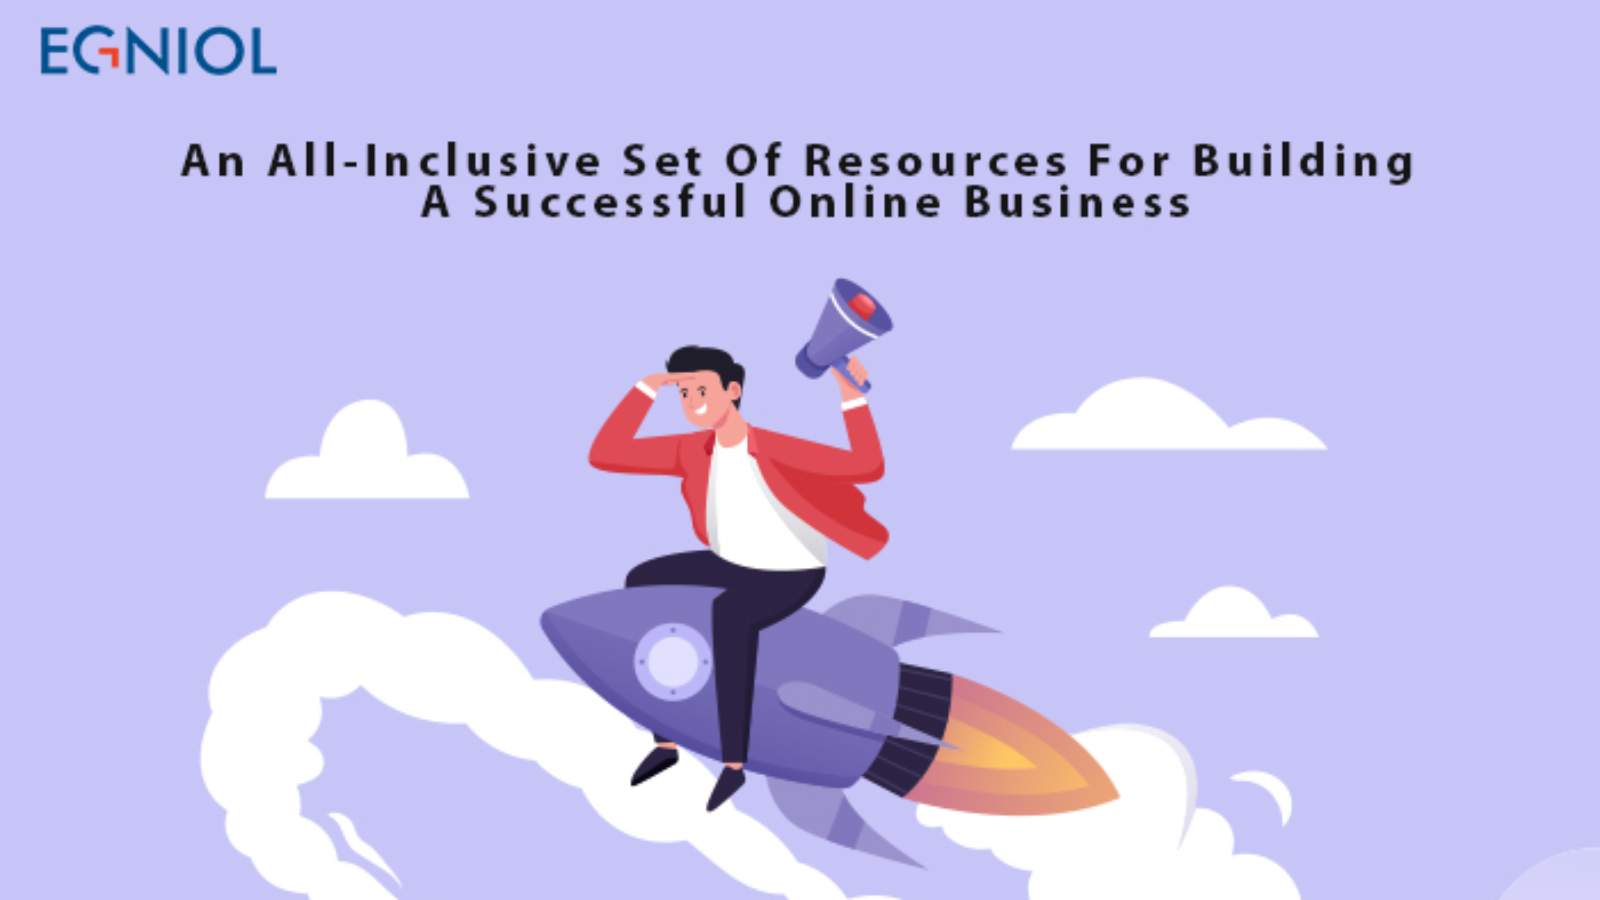 Resources For Building A Successful Online Business - By Egniol